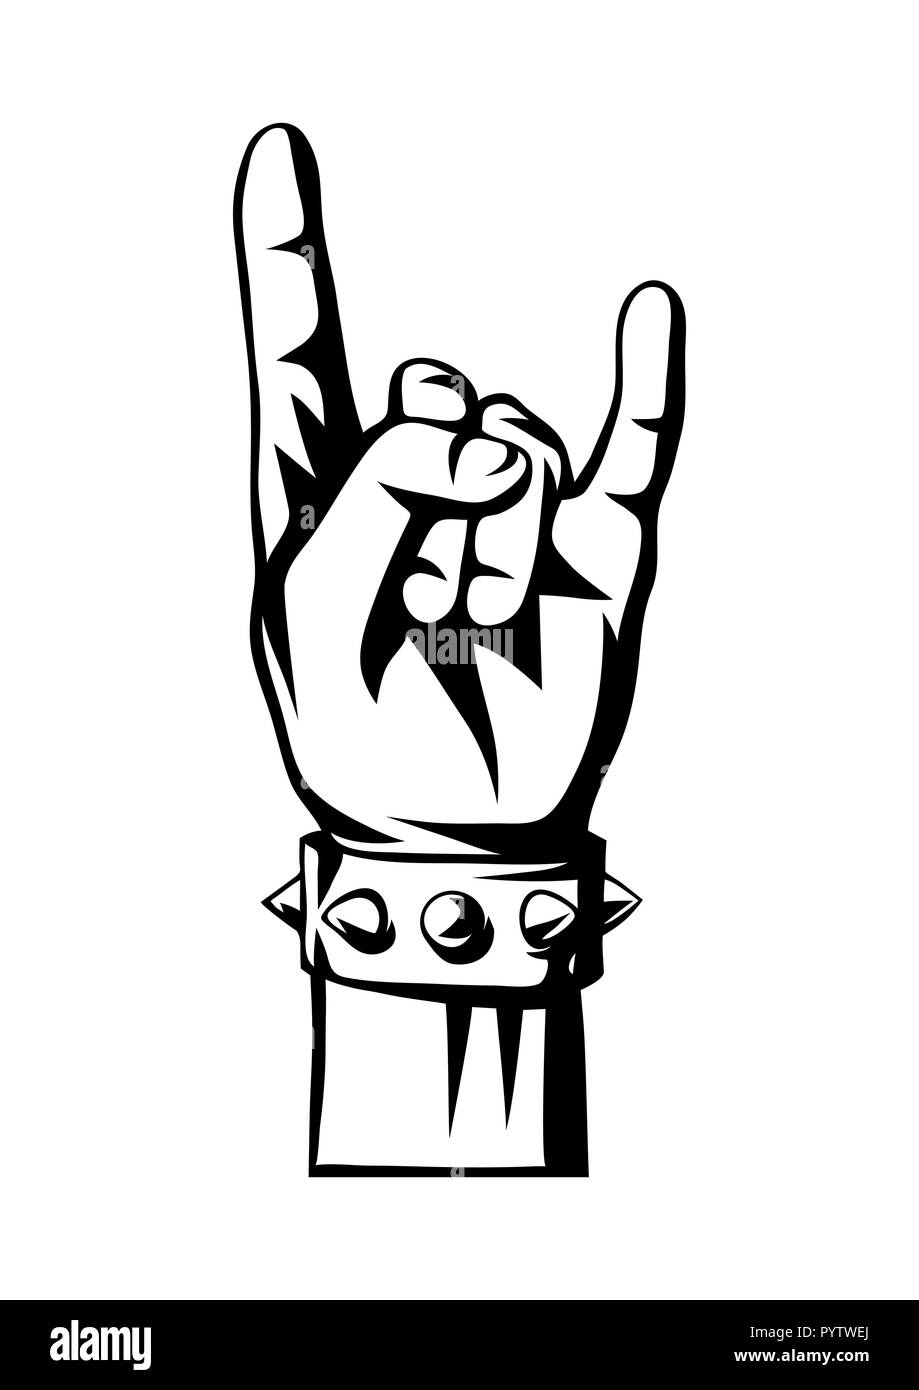 Rock and roll or heavy metal hand sign. Stock Vector